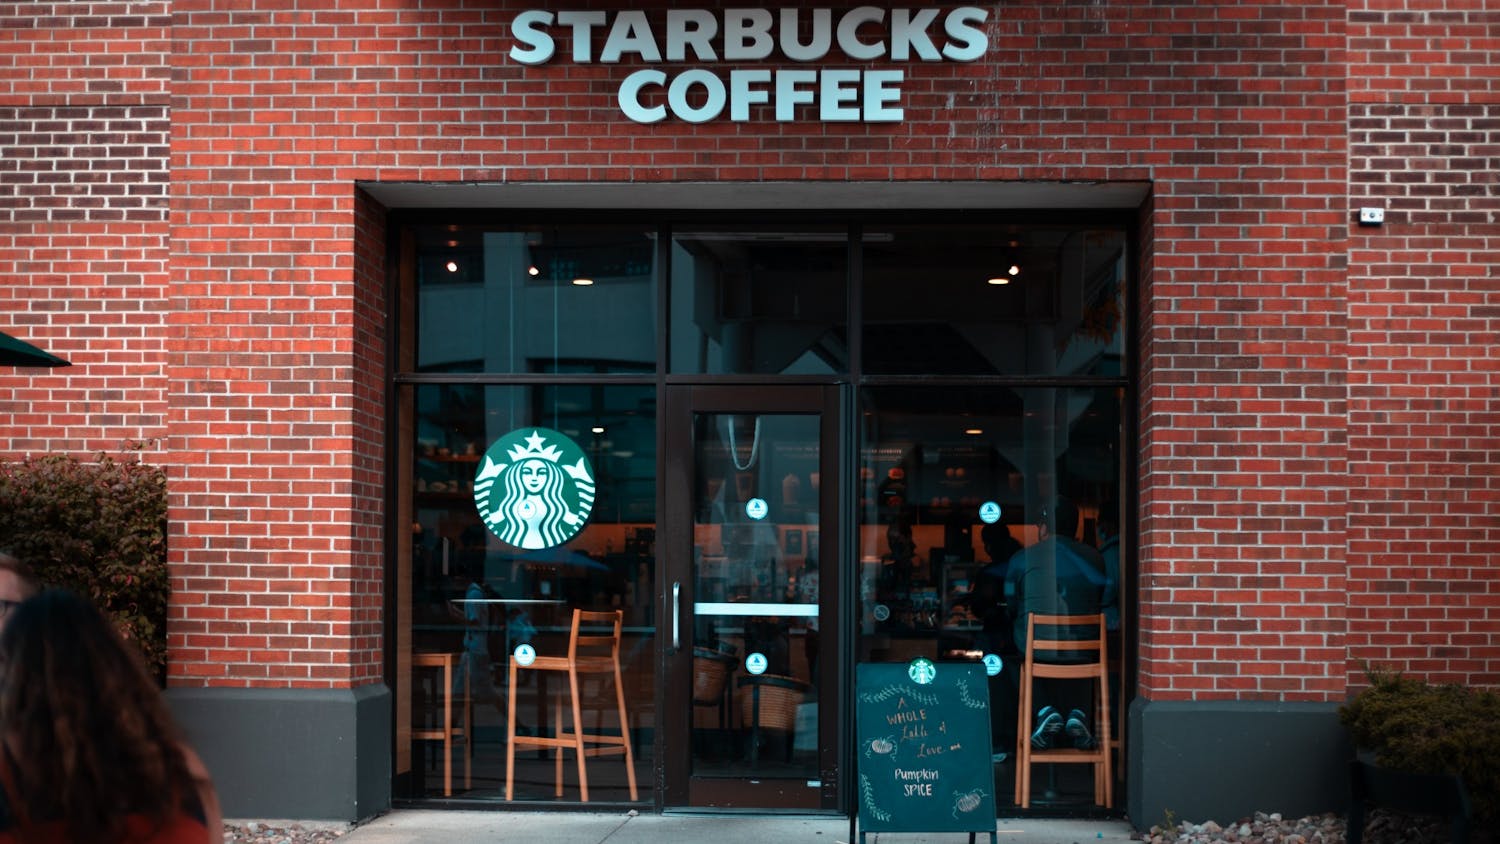 Employees at the Starbucks on Elmwood Avenue voted 19-8 in favor of forming a union last Thursday, making that location the first Starbucks store in the country to unionize.&nbsp;